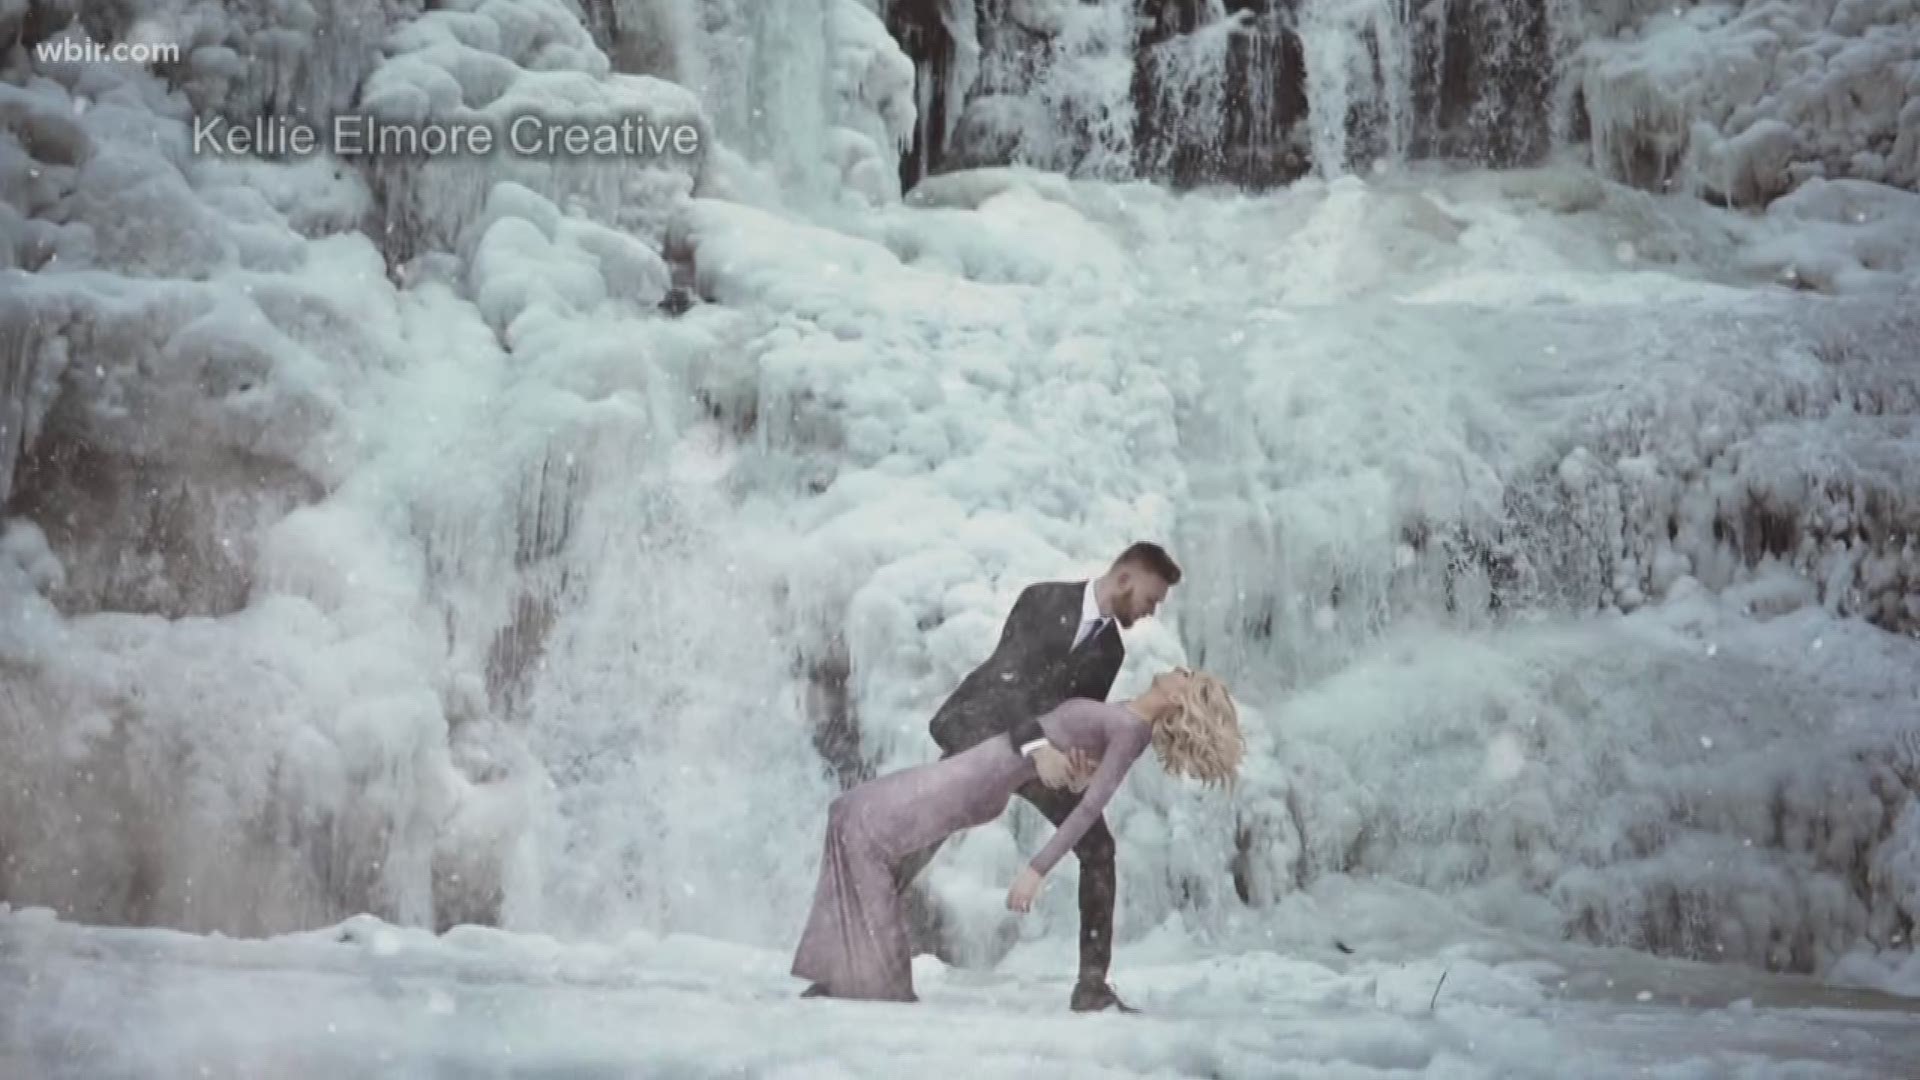 Jan. 9, 2018: A young couple whose frozen engagement photos are heating up the internet share the story behind these breathtaking shots.